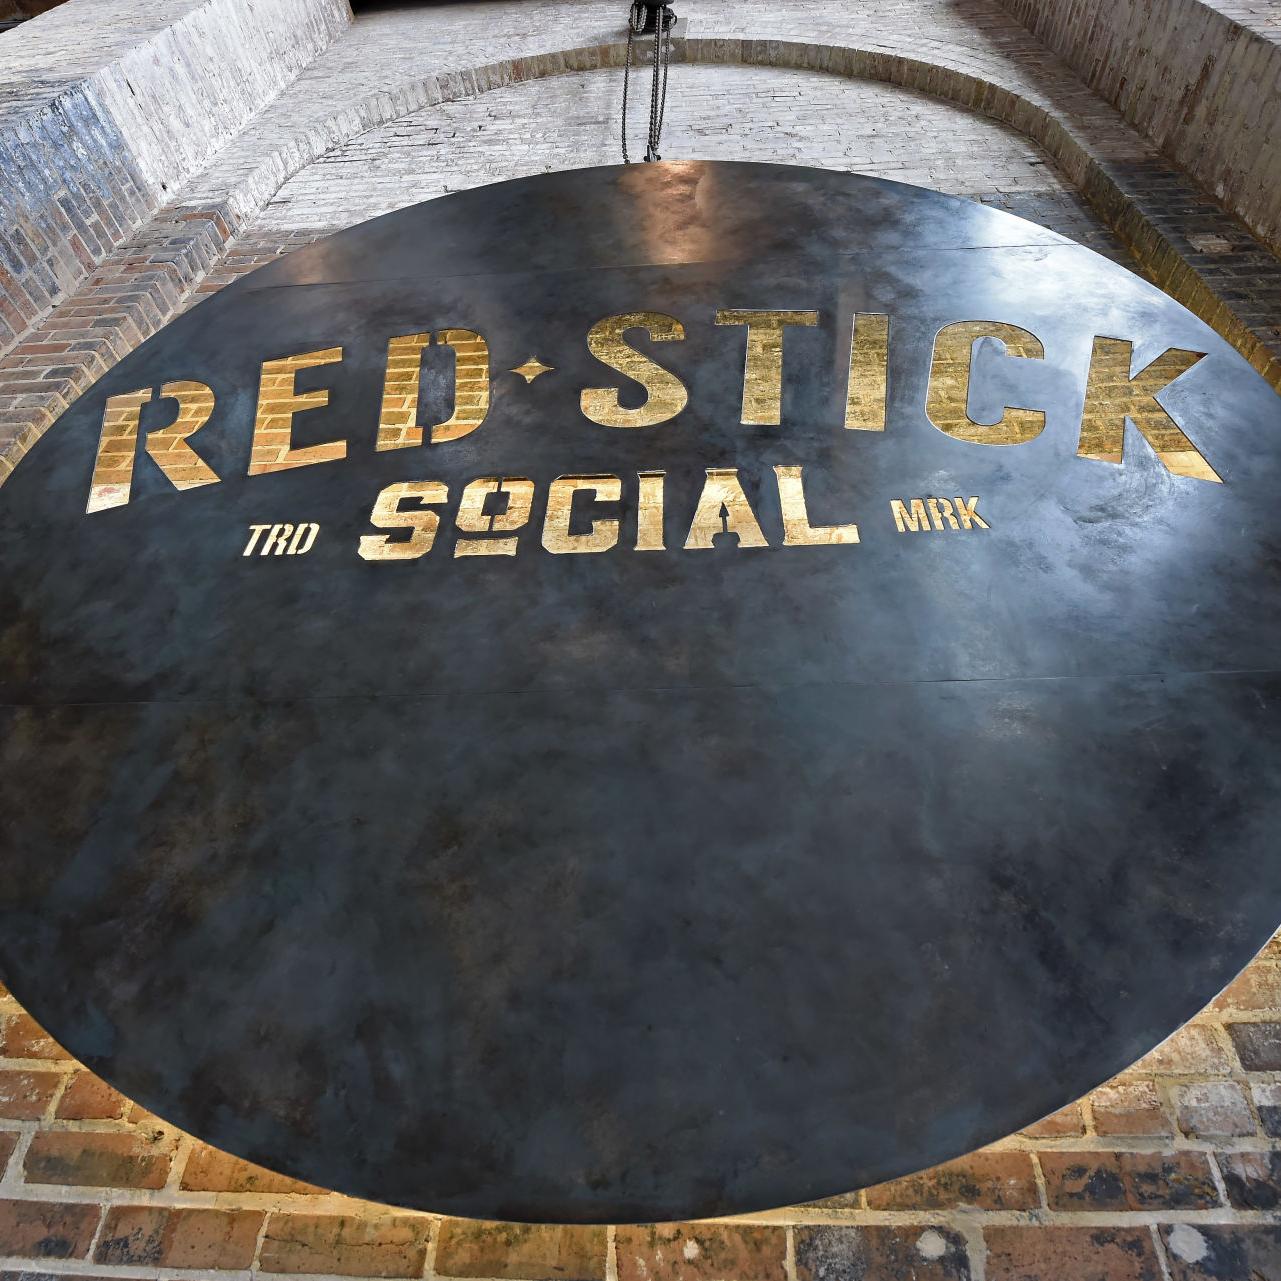 Red Stick Social issues apology, takes down dress code Facebook post after  backlash, Food/Restaurants